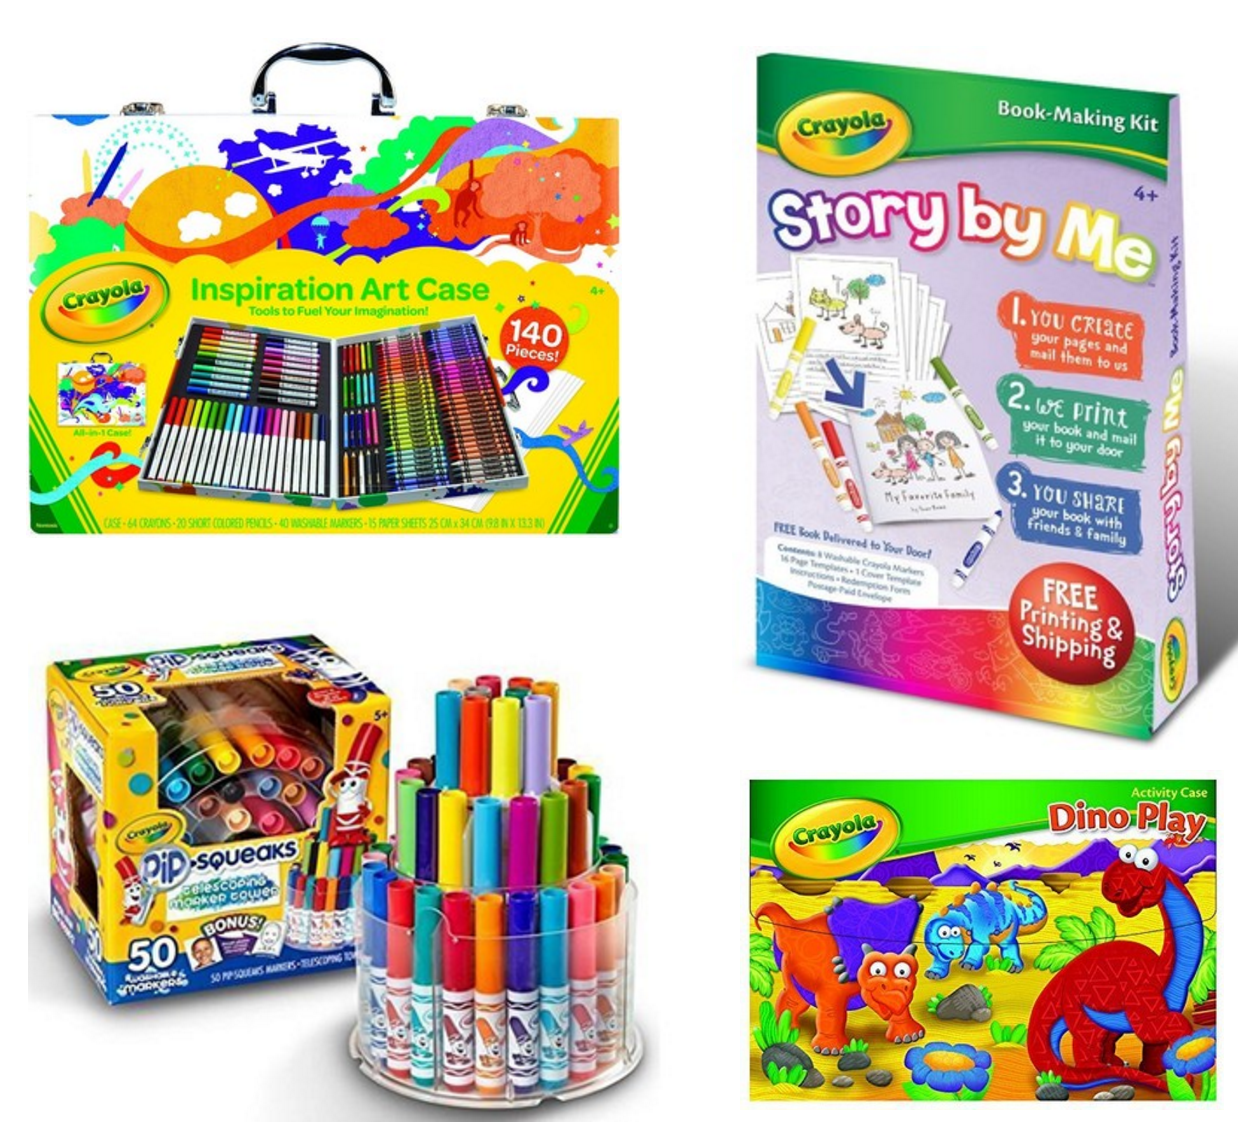 Up to 40% Off Select Crayola Products = Crayola Inspiration Art Case